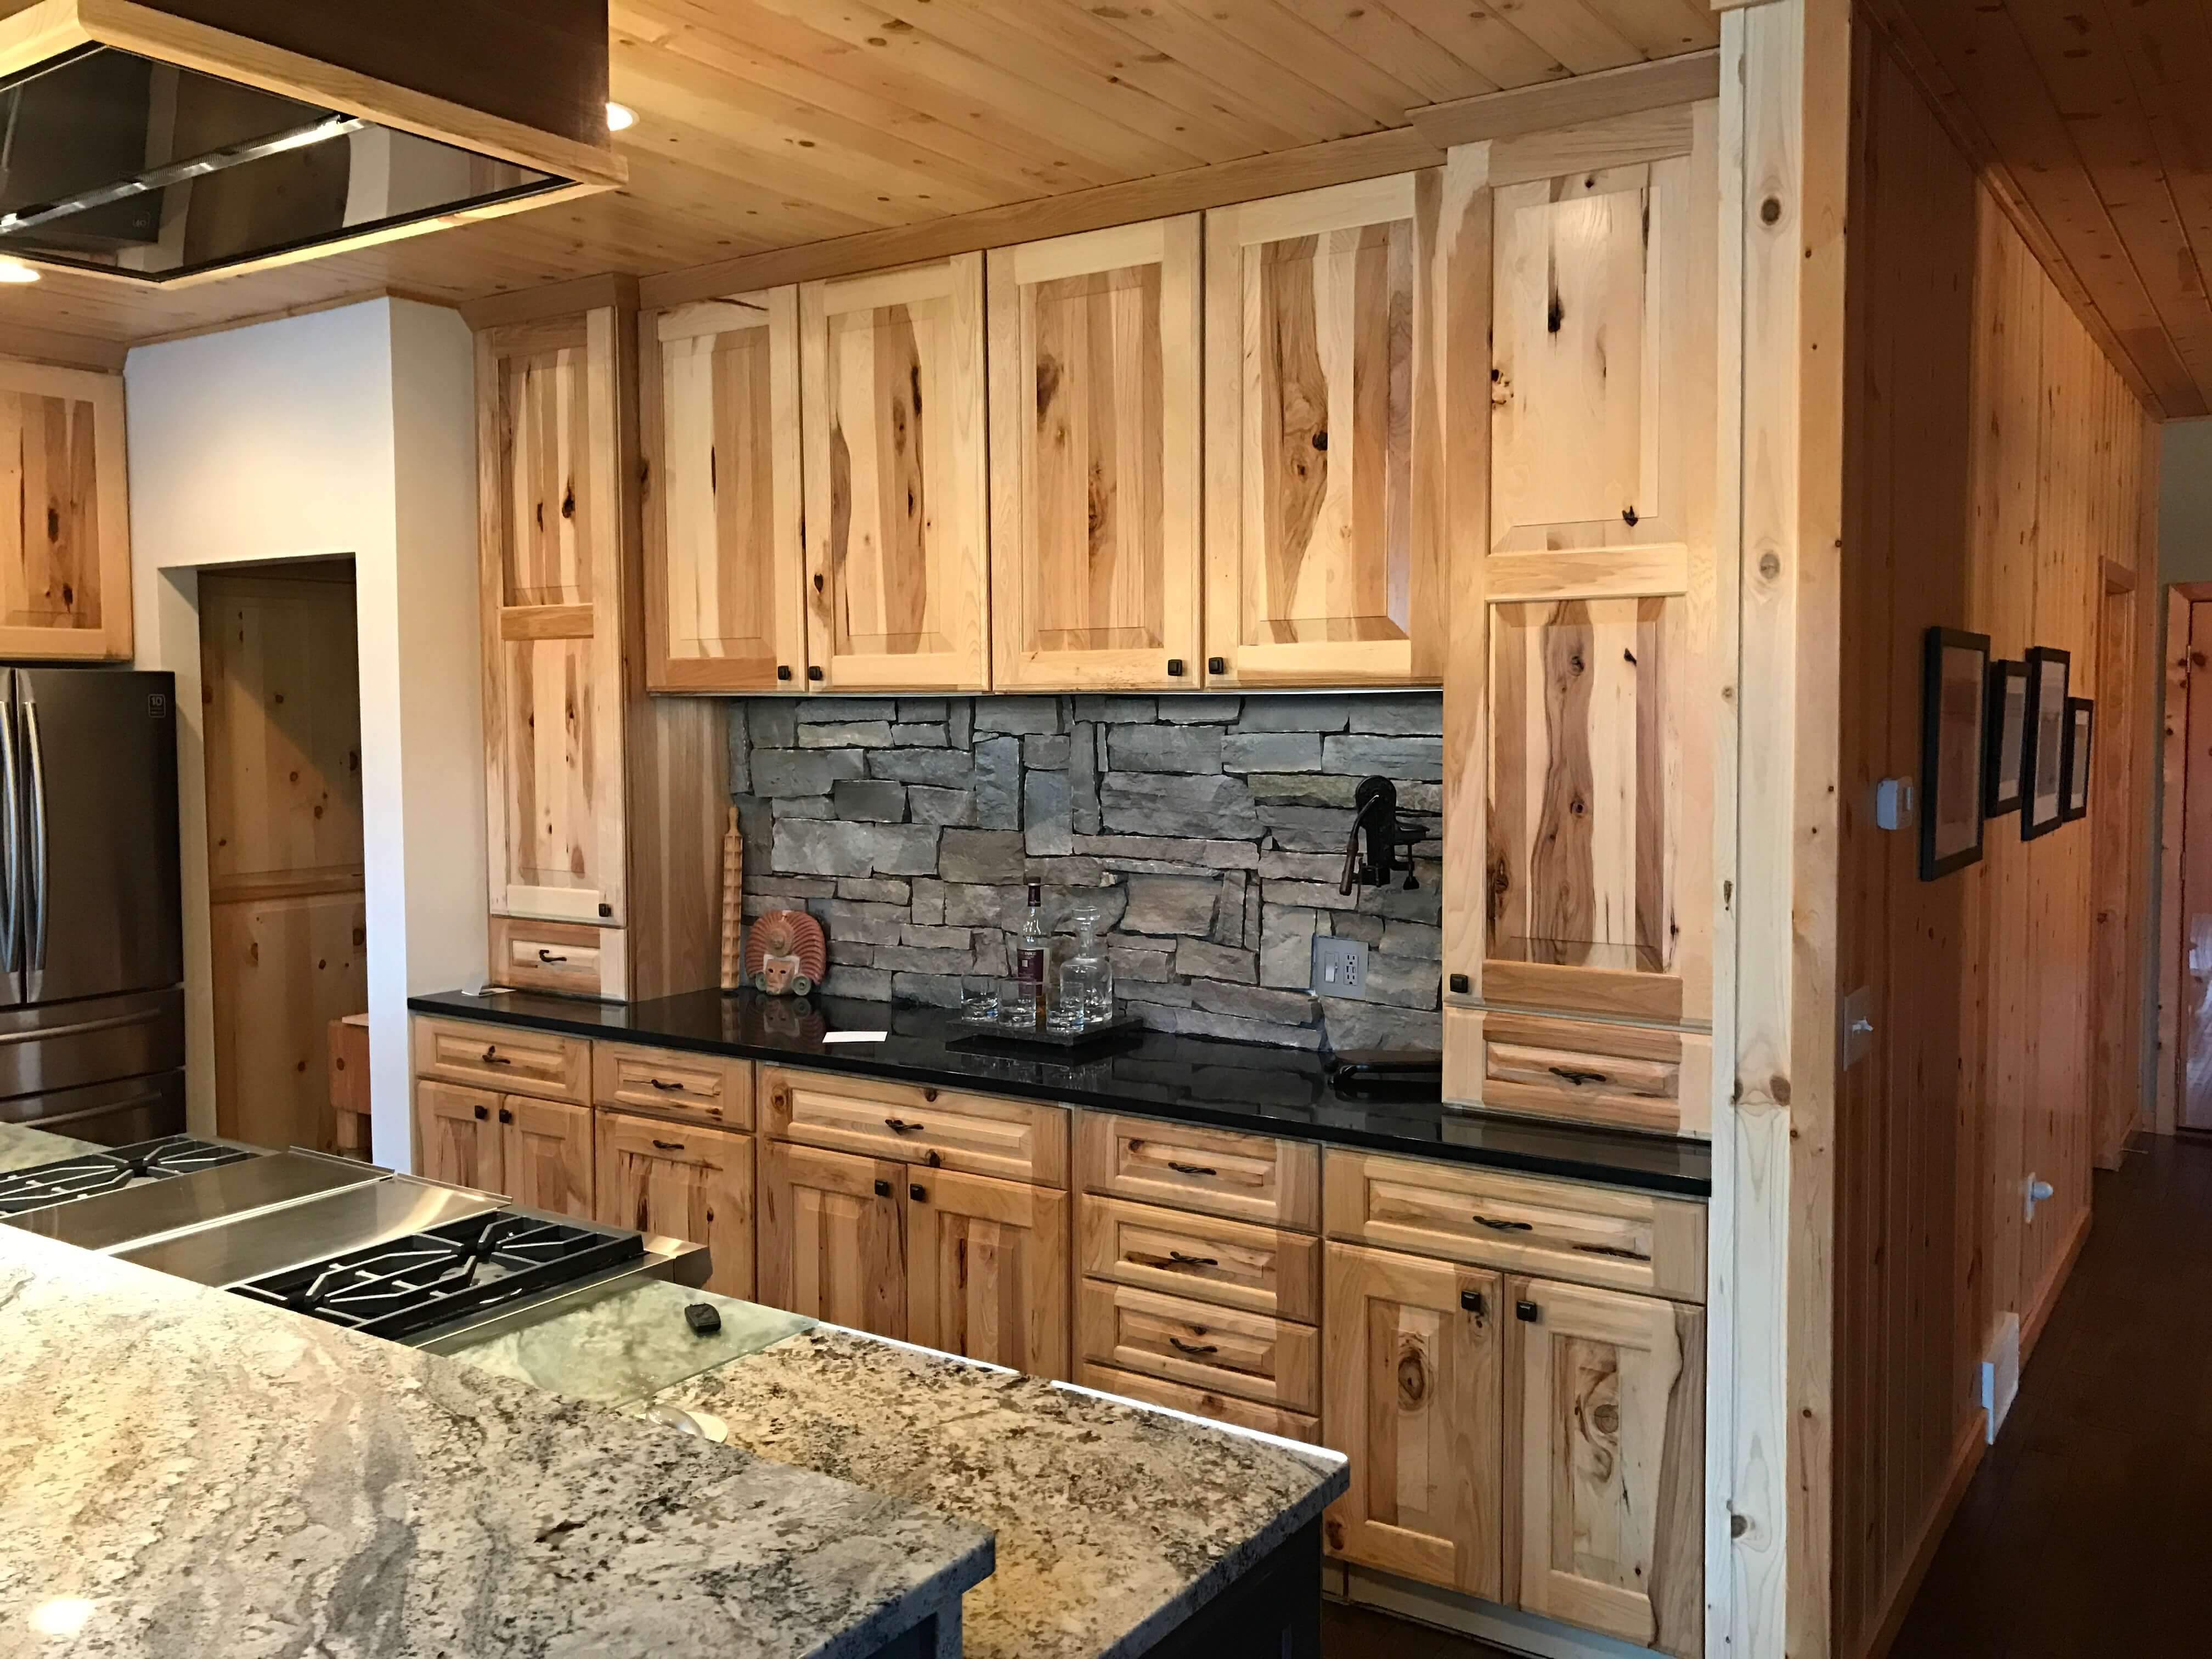 Rustic Hickory Cabinetry, Hickory Cabinets Kitchen Design